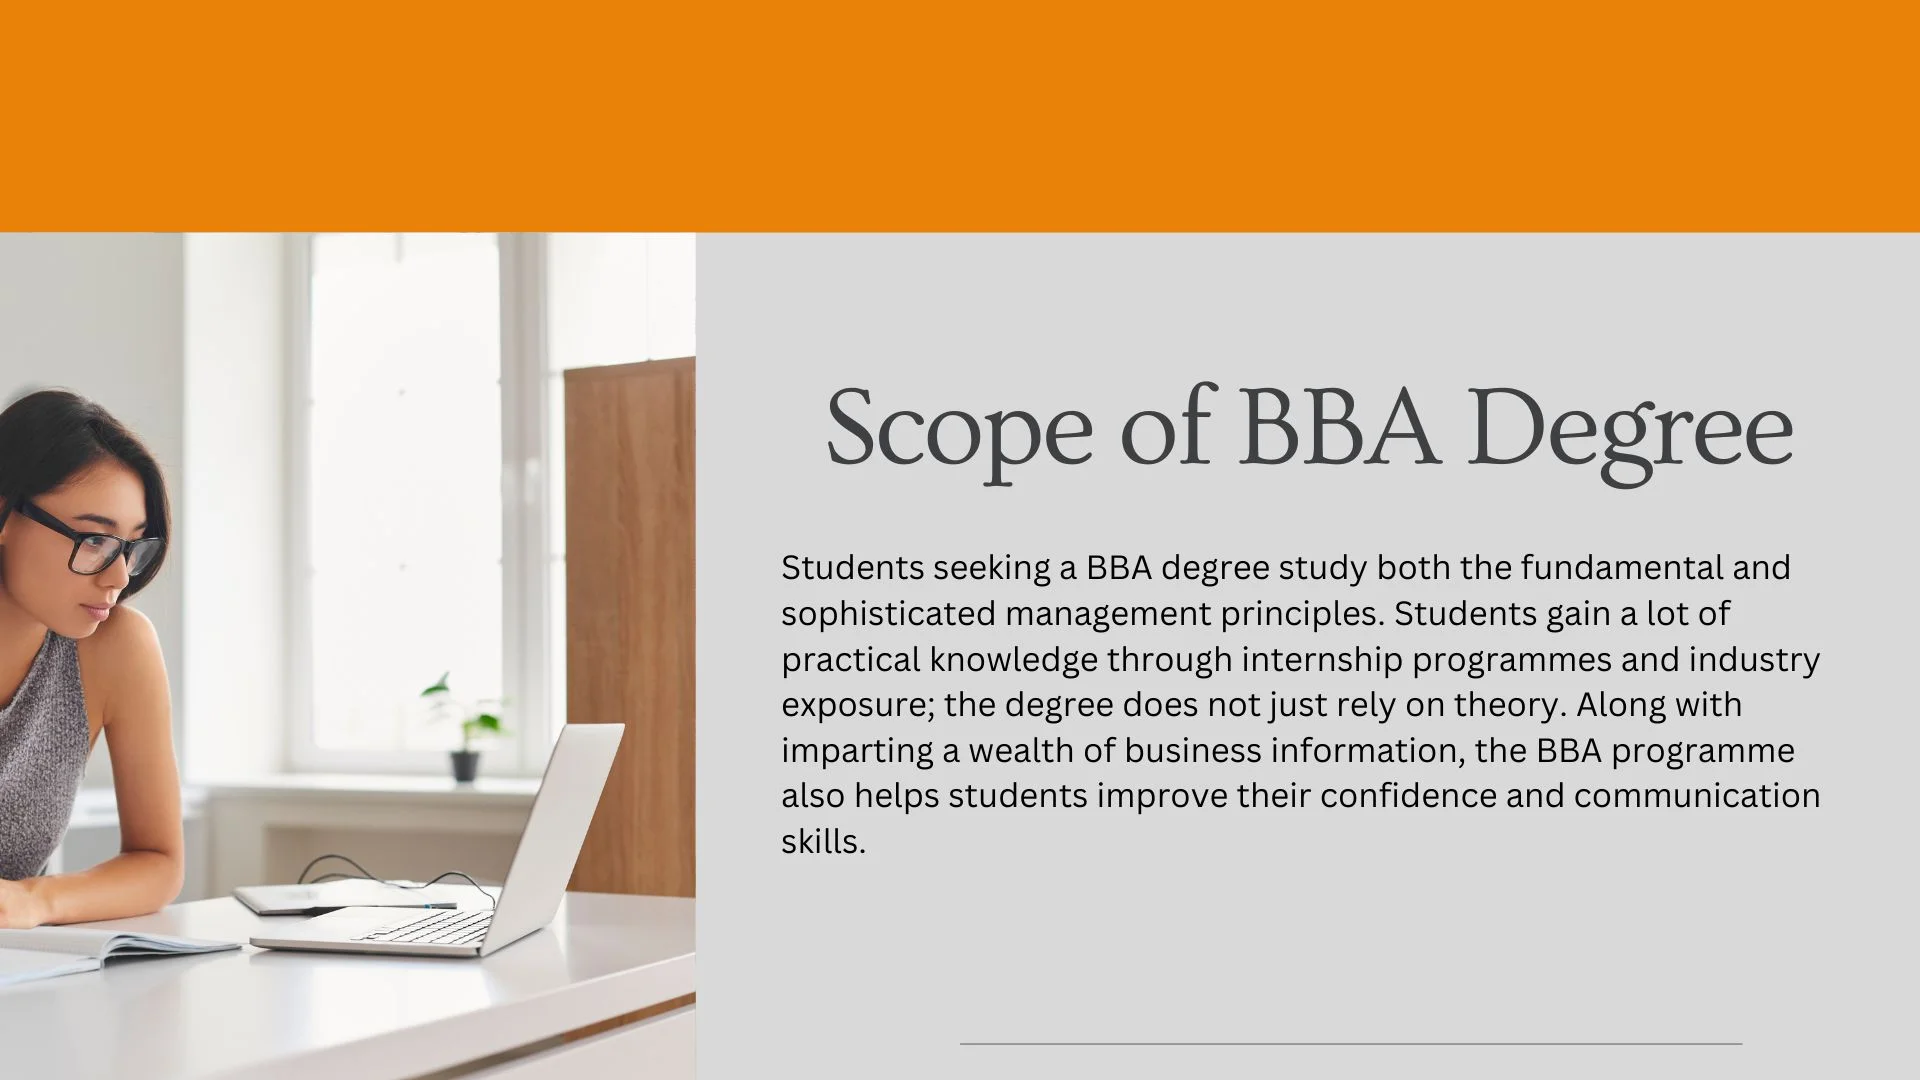 Scope of BBA Degree